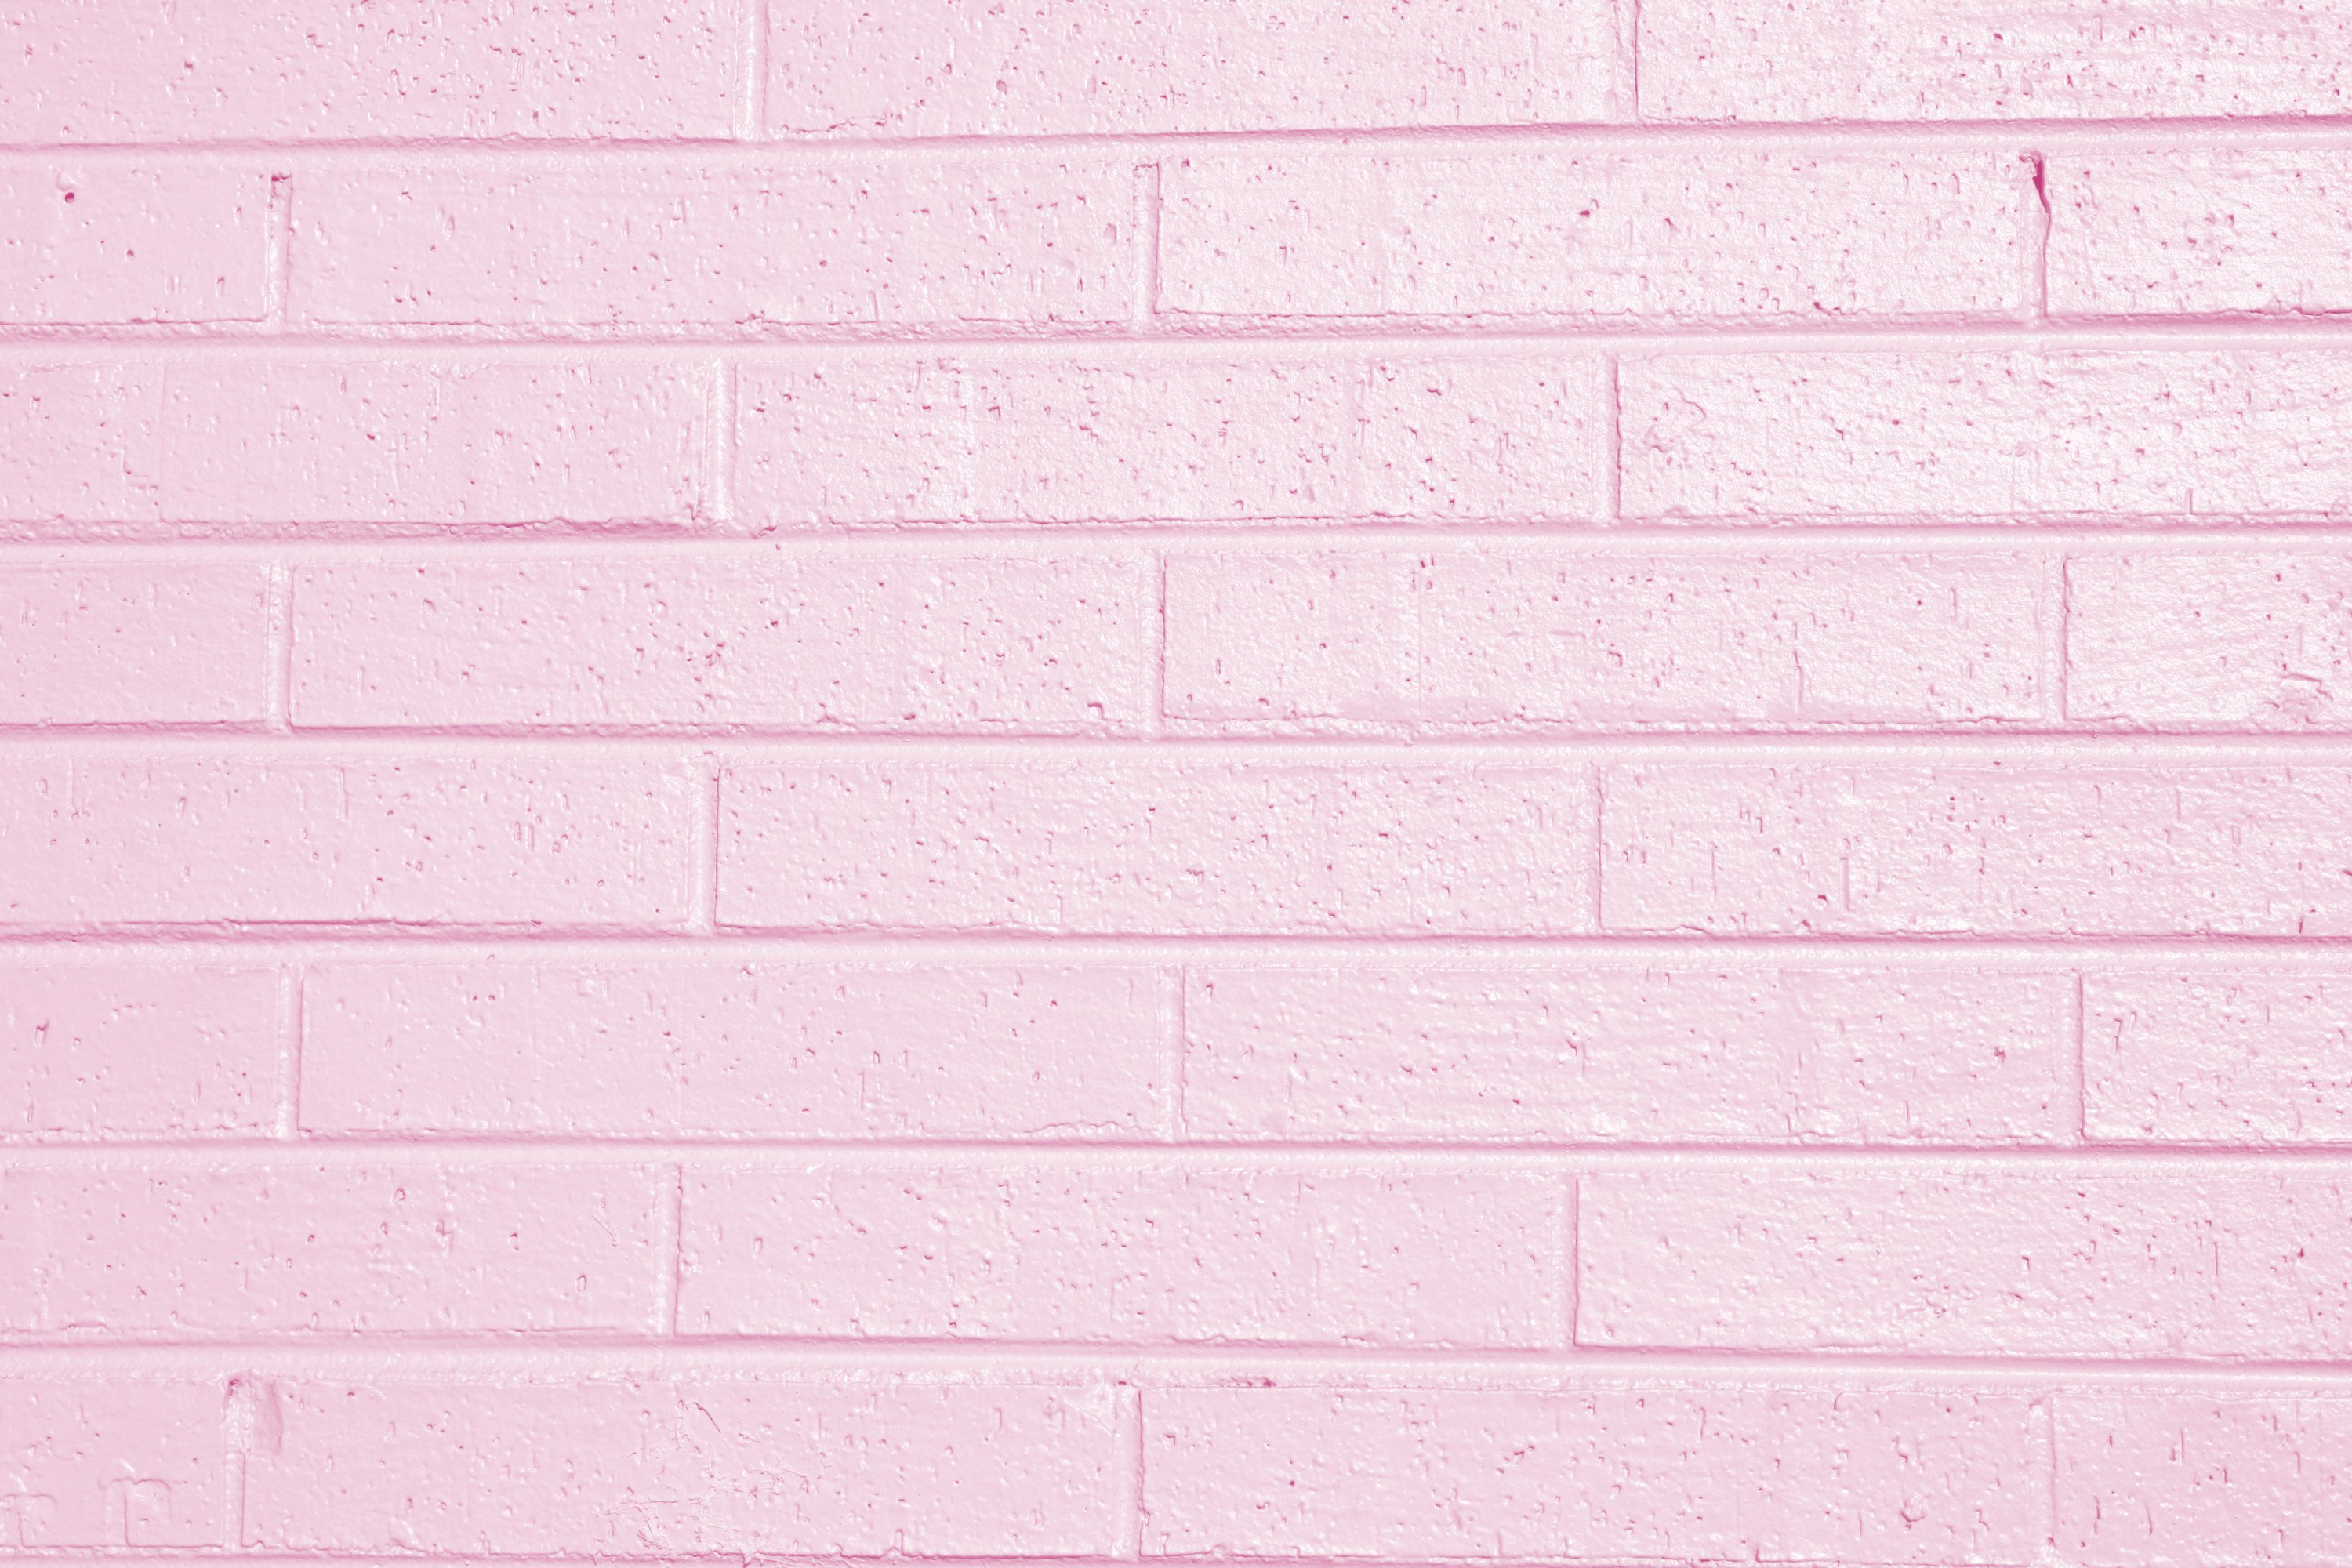 3000x2000 Pink Painted Brick Wall Texture Picture | Free Photograph | Photos Public Domai